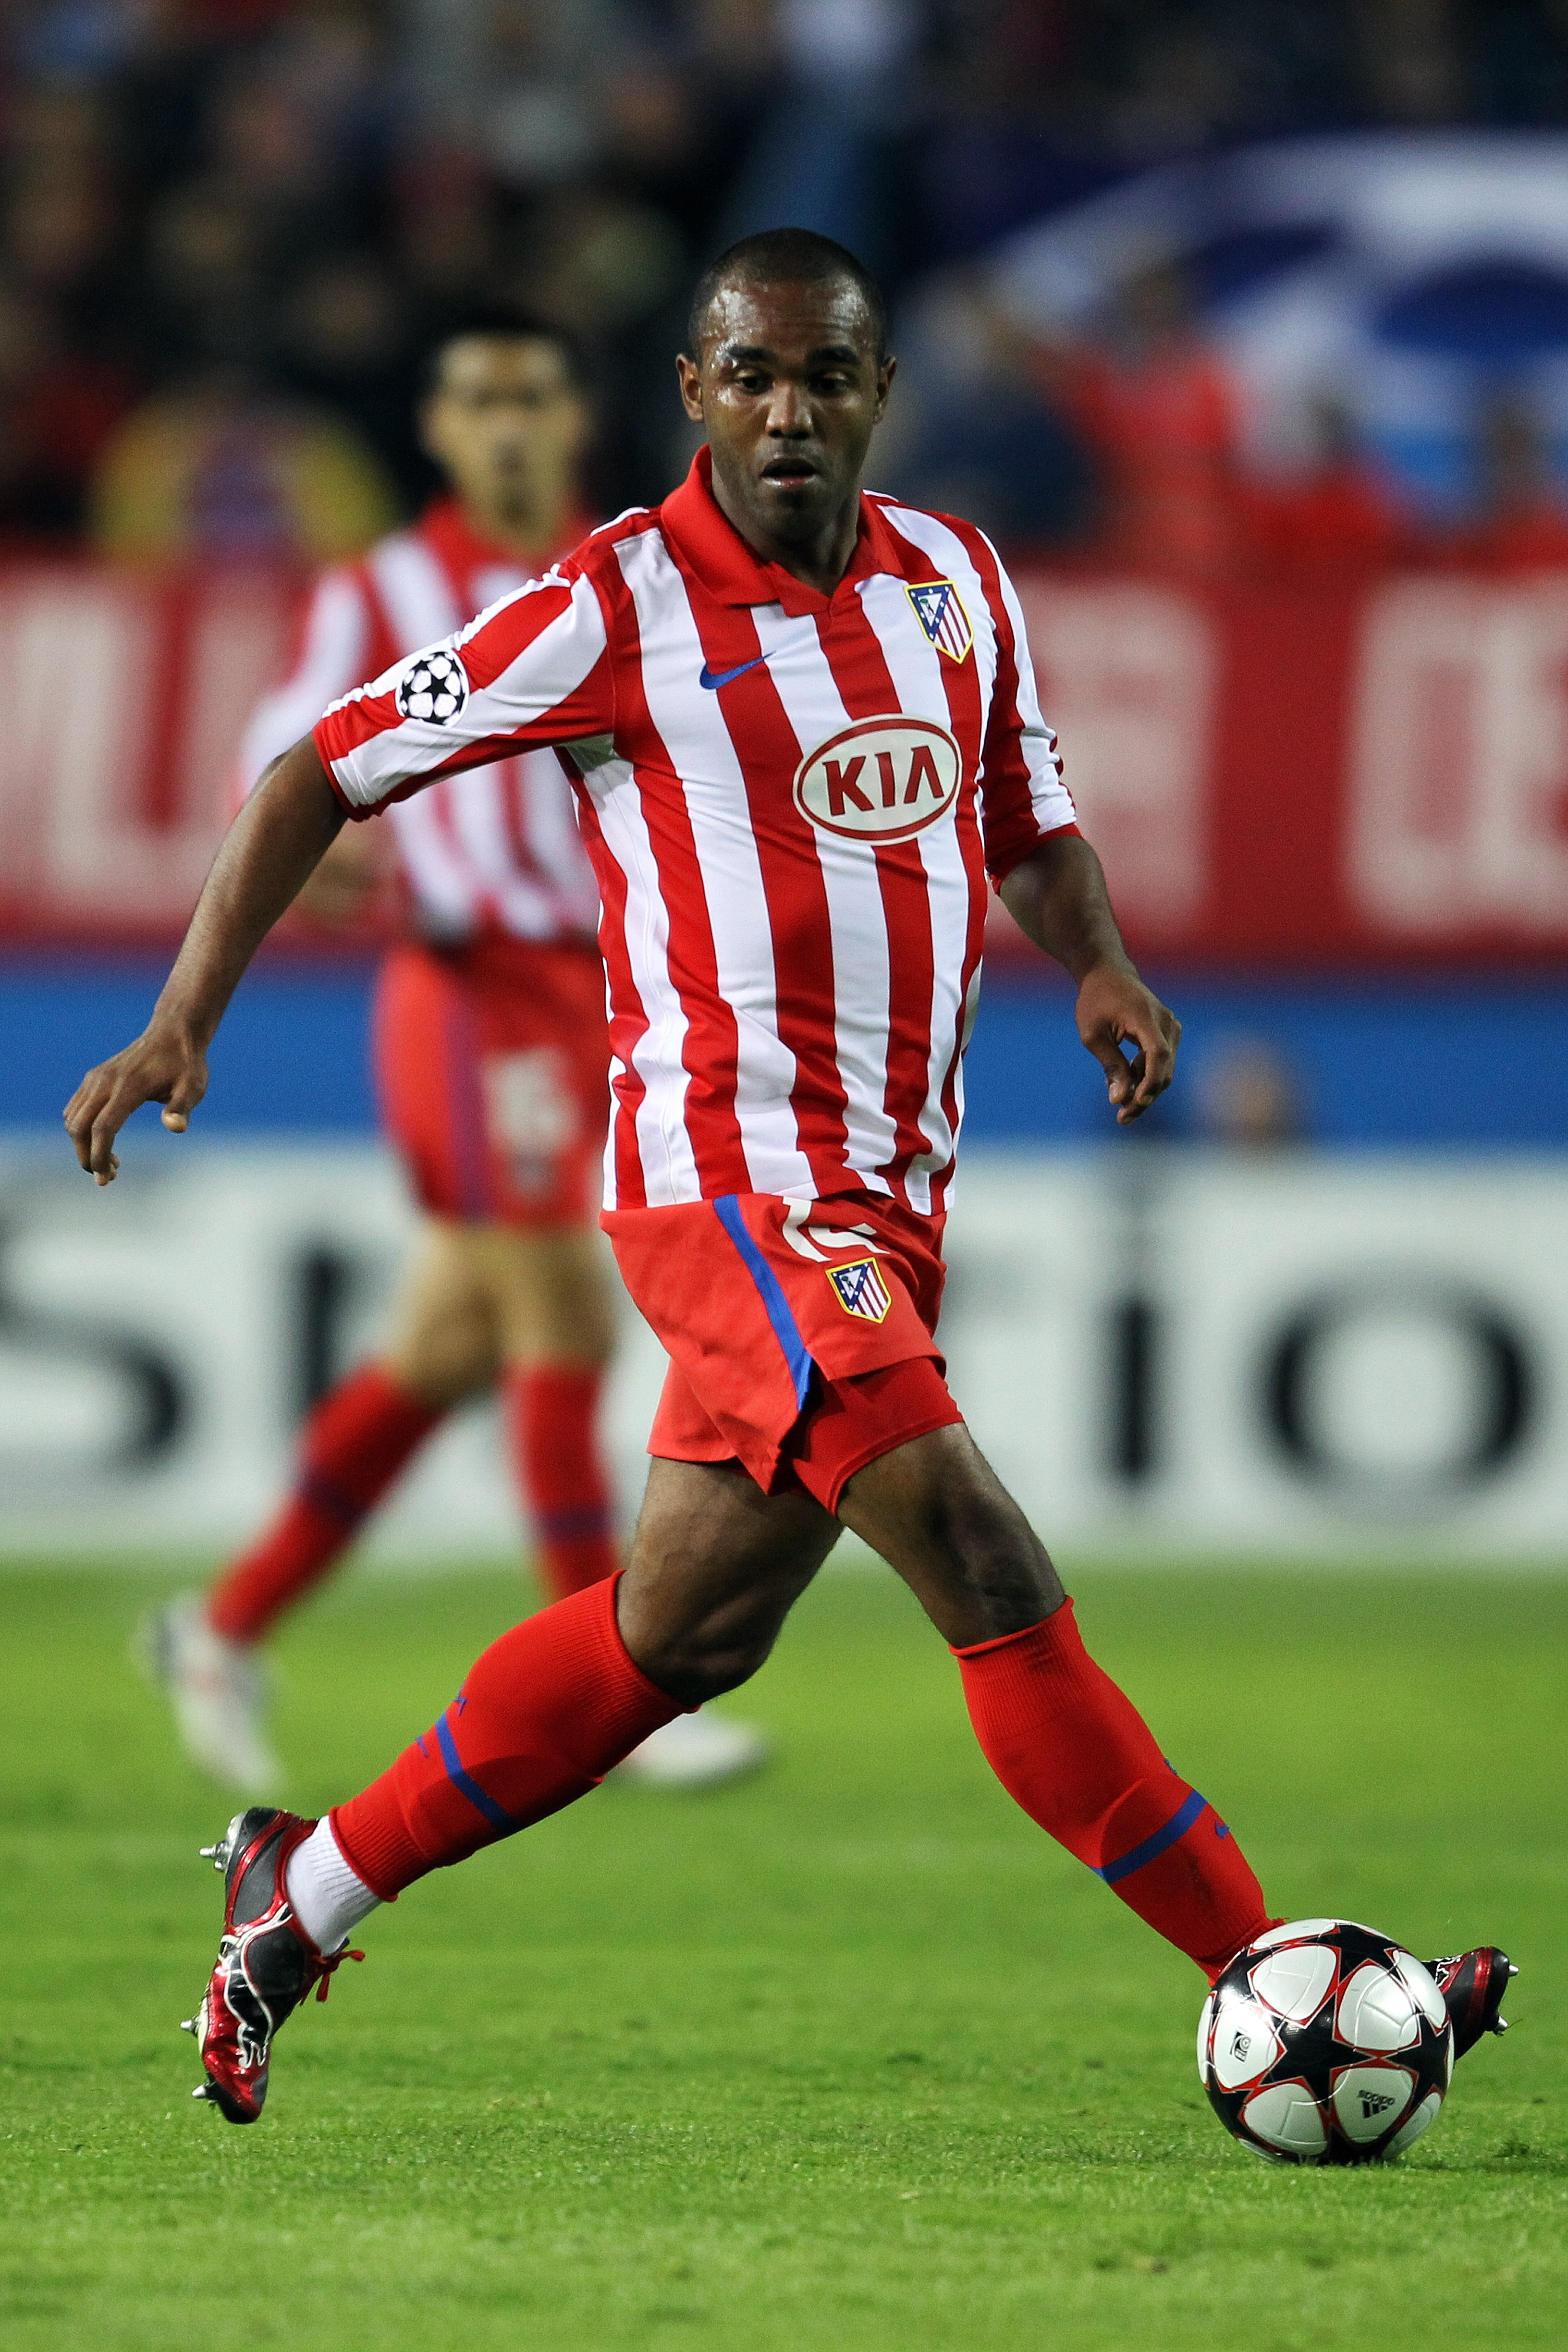 MADRID, SPAIN - NOVEMBER 03:  Florent Sinama-Pongolle of Atletico Madrid in action during Champions League Group D match between Atletico Madrid and Chelsea at the Vicente Calderon Stadium on November 3, 2009 in Madrid, Spain.  (Photo by Shaun Botterill/G